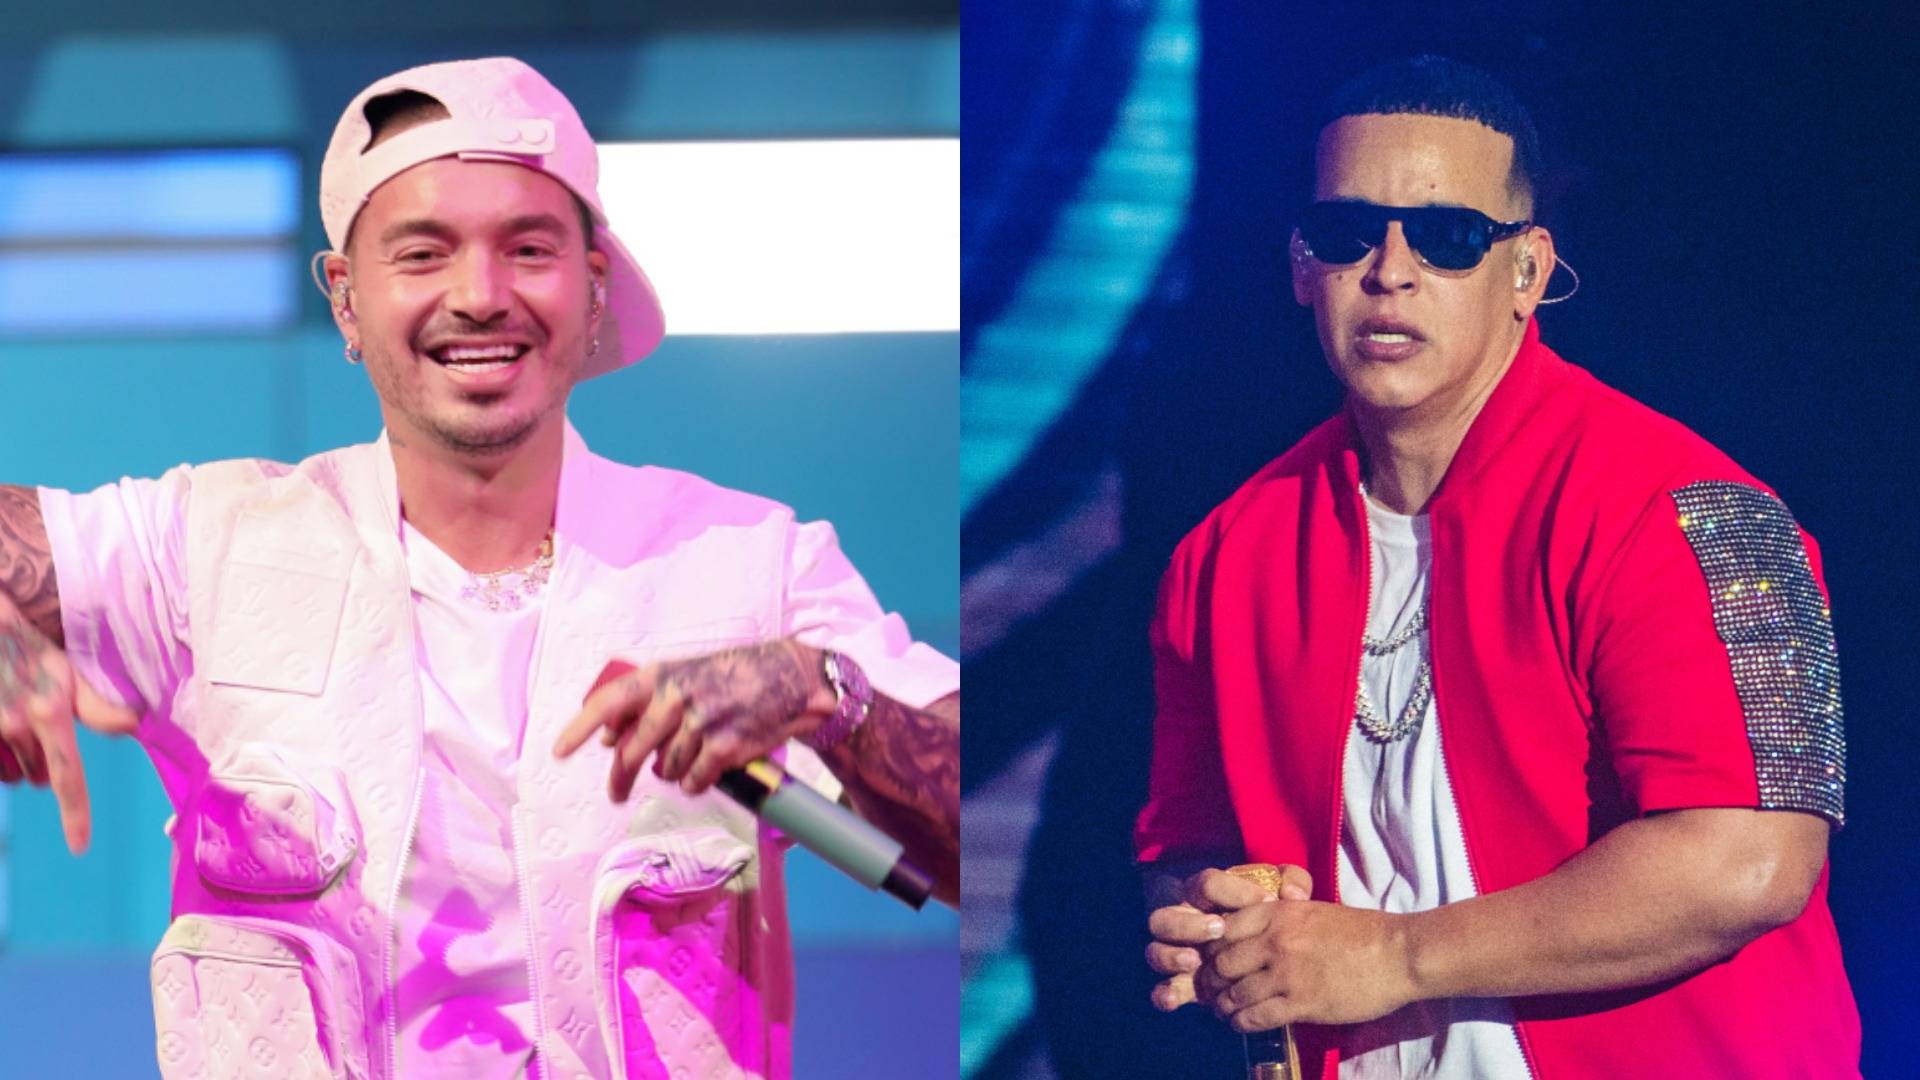 Congratulations to J Balvin for winning the 2023 Premio Lo Nuestro award  for Remix of The Year for Sal Y Perrea (Remix) with Sech and Daddy Yankee  - ROC NATION